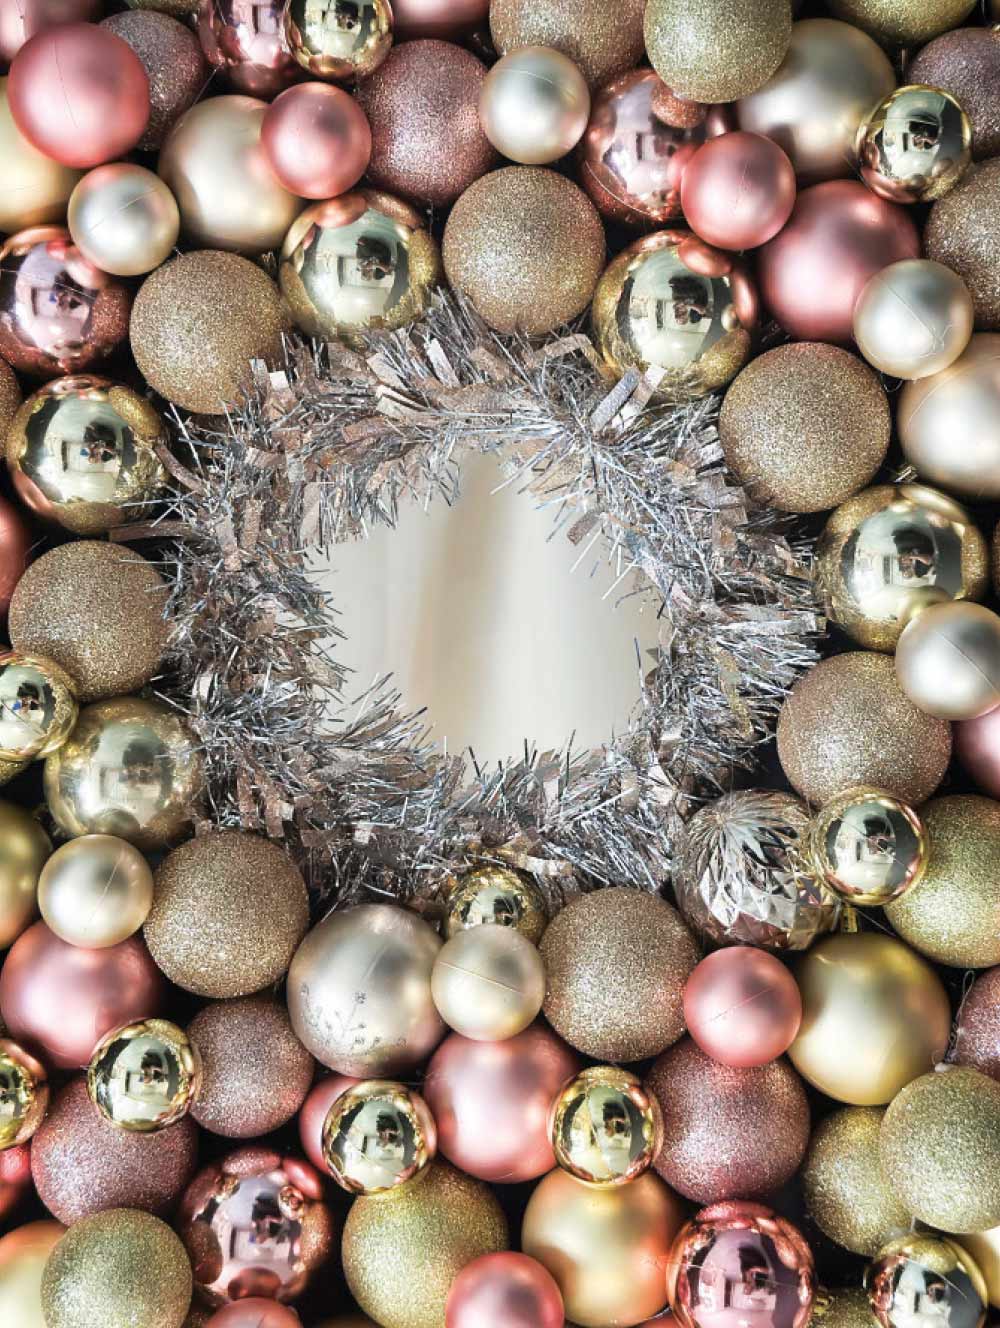 Close-up portrait photograph perspective of an assorted bigger bunch of Ornaments glued around the dark/light bronze Garland/Tinsel with a cut-out circular hole through it with shiny lighted reflections off the Ornaments